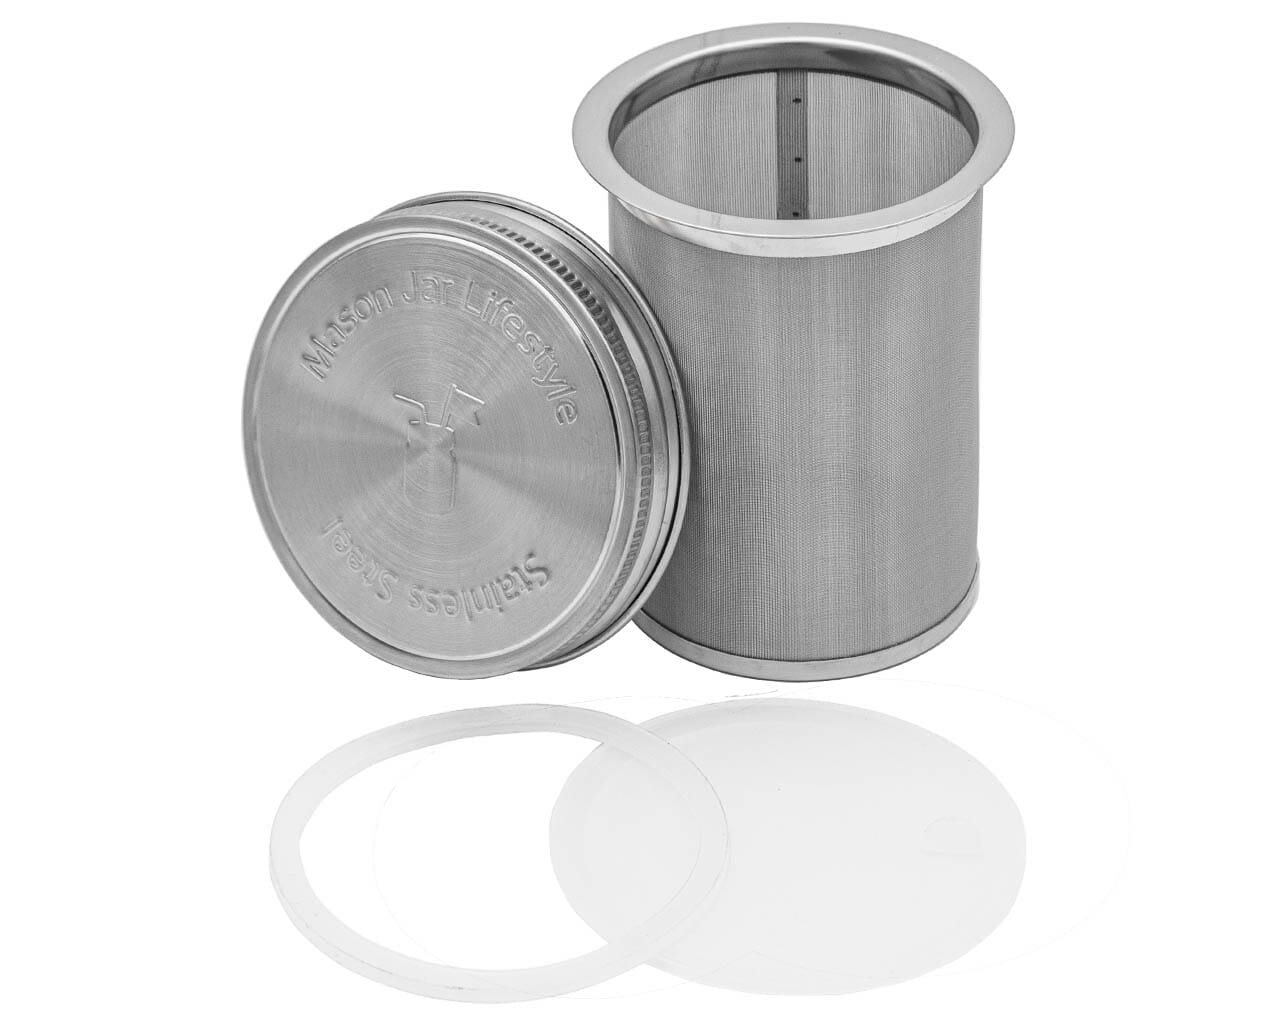 Cold Brew Coffee and Tea Maker Stainless Steel Filter for Mason Jars with Lid and 2 Silicone Seals (No Jar, pint)